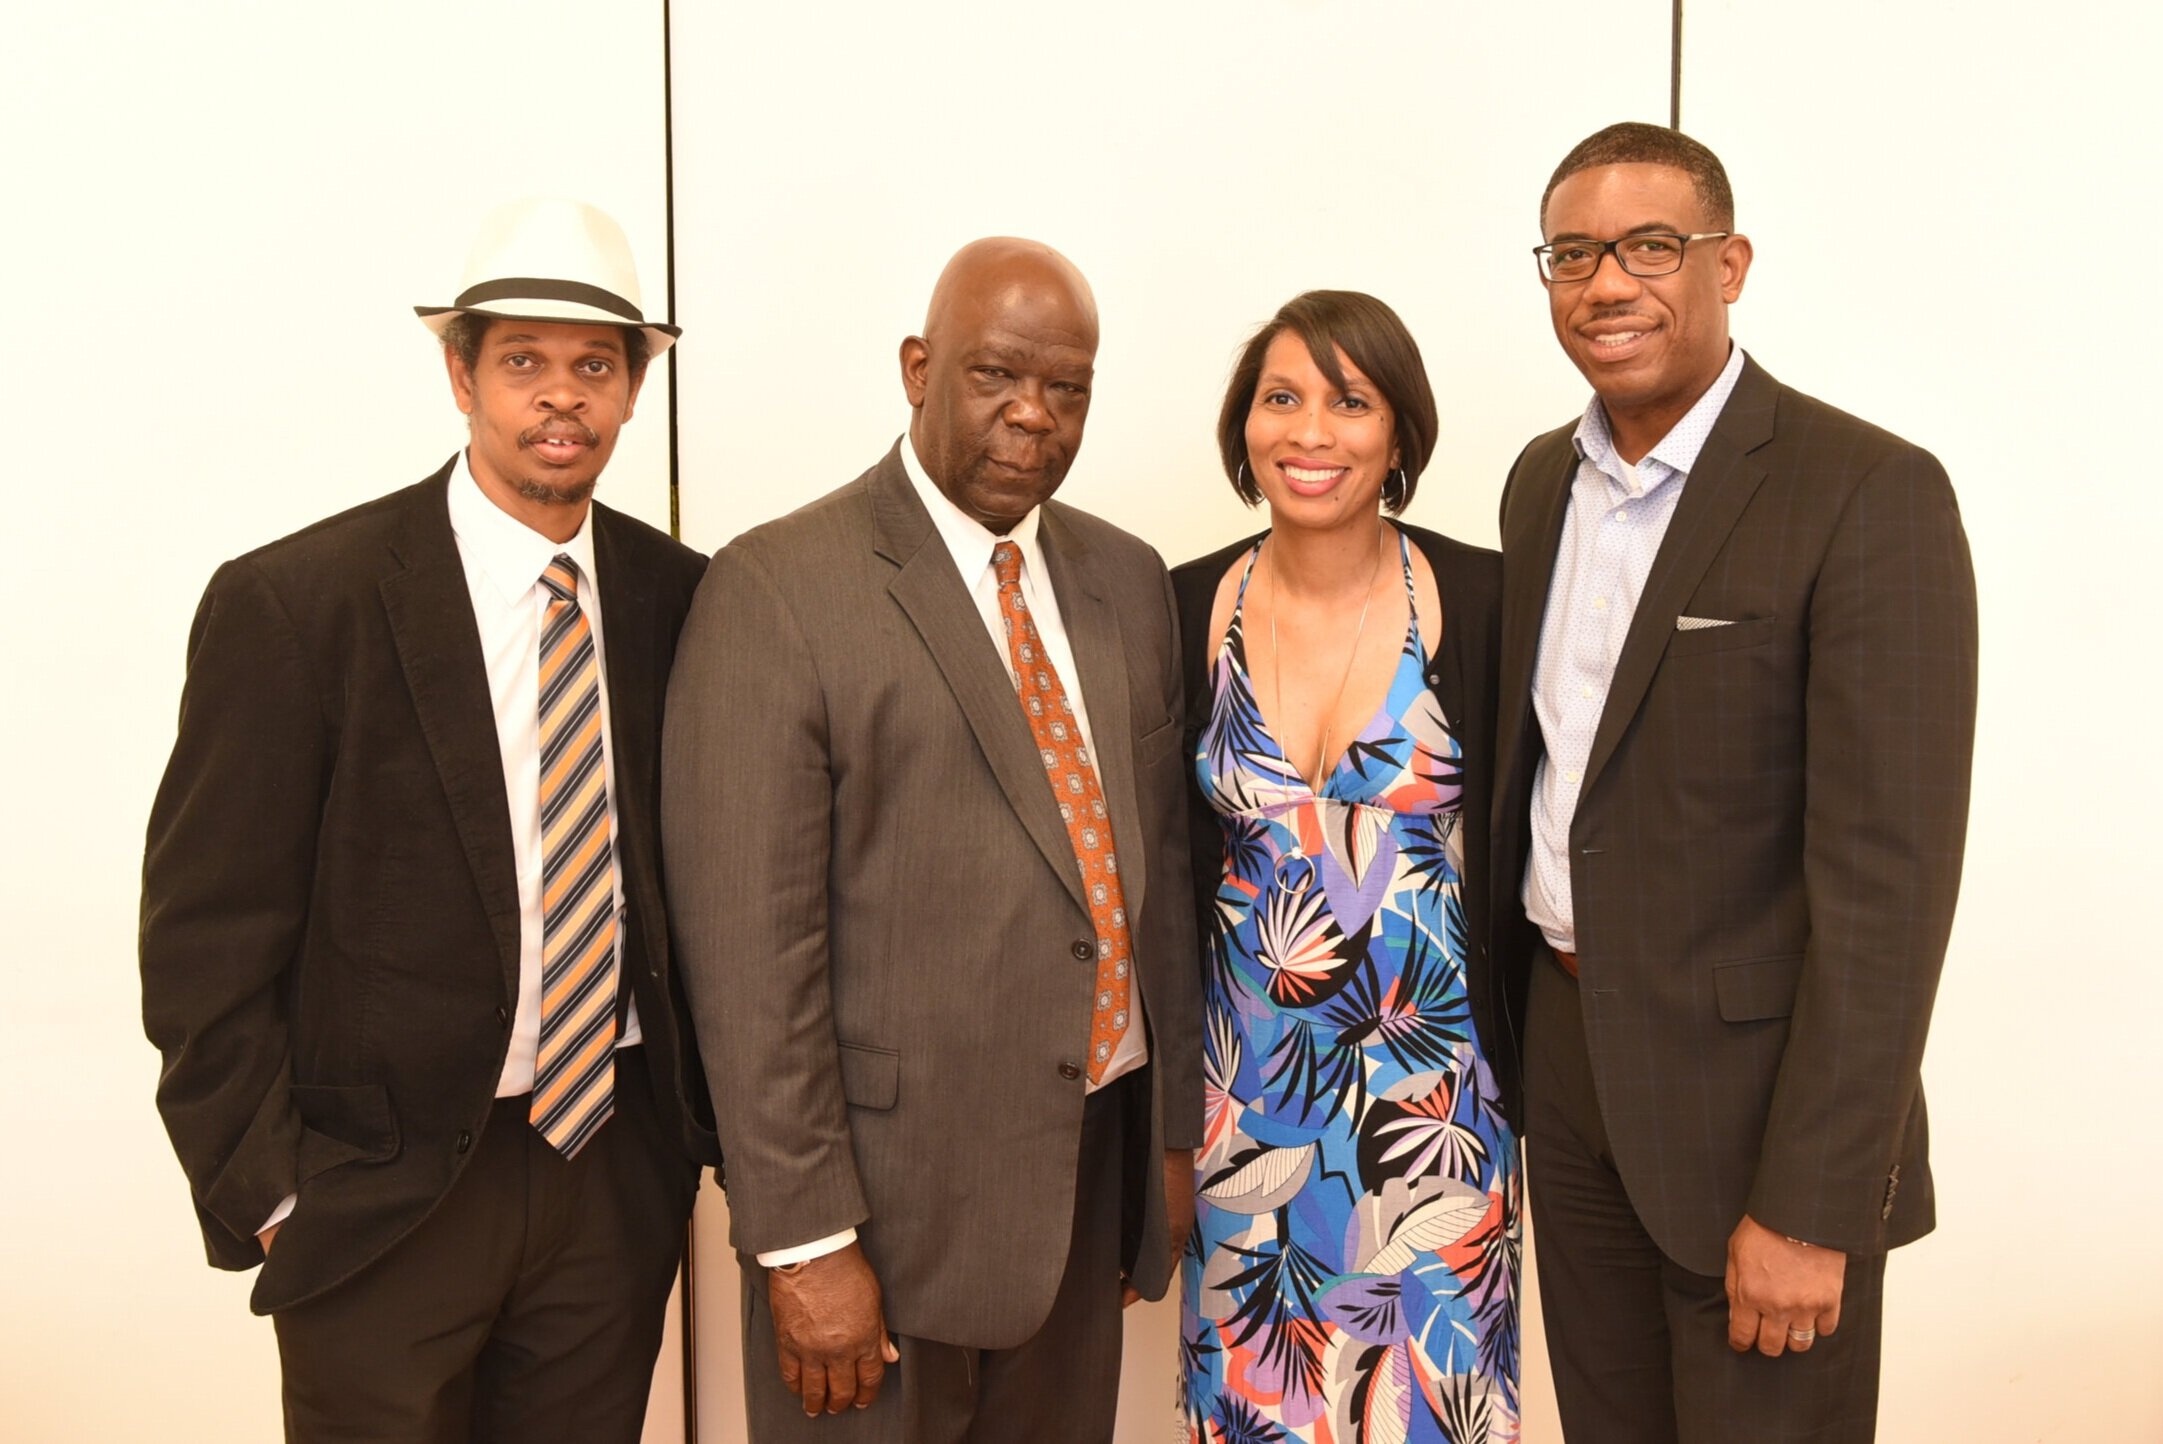 Curtis Ennis (r) with then Africentric Alternative School Principal Luther Brown (second from left), Vice-Principal Lanya Lewis and Parent Council Co-Chair Paul Osbourne at the Africentric school graduation in July 2018 (Photo by Ron Fanfair)